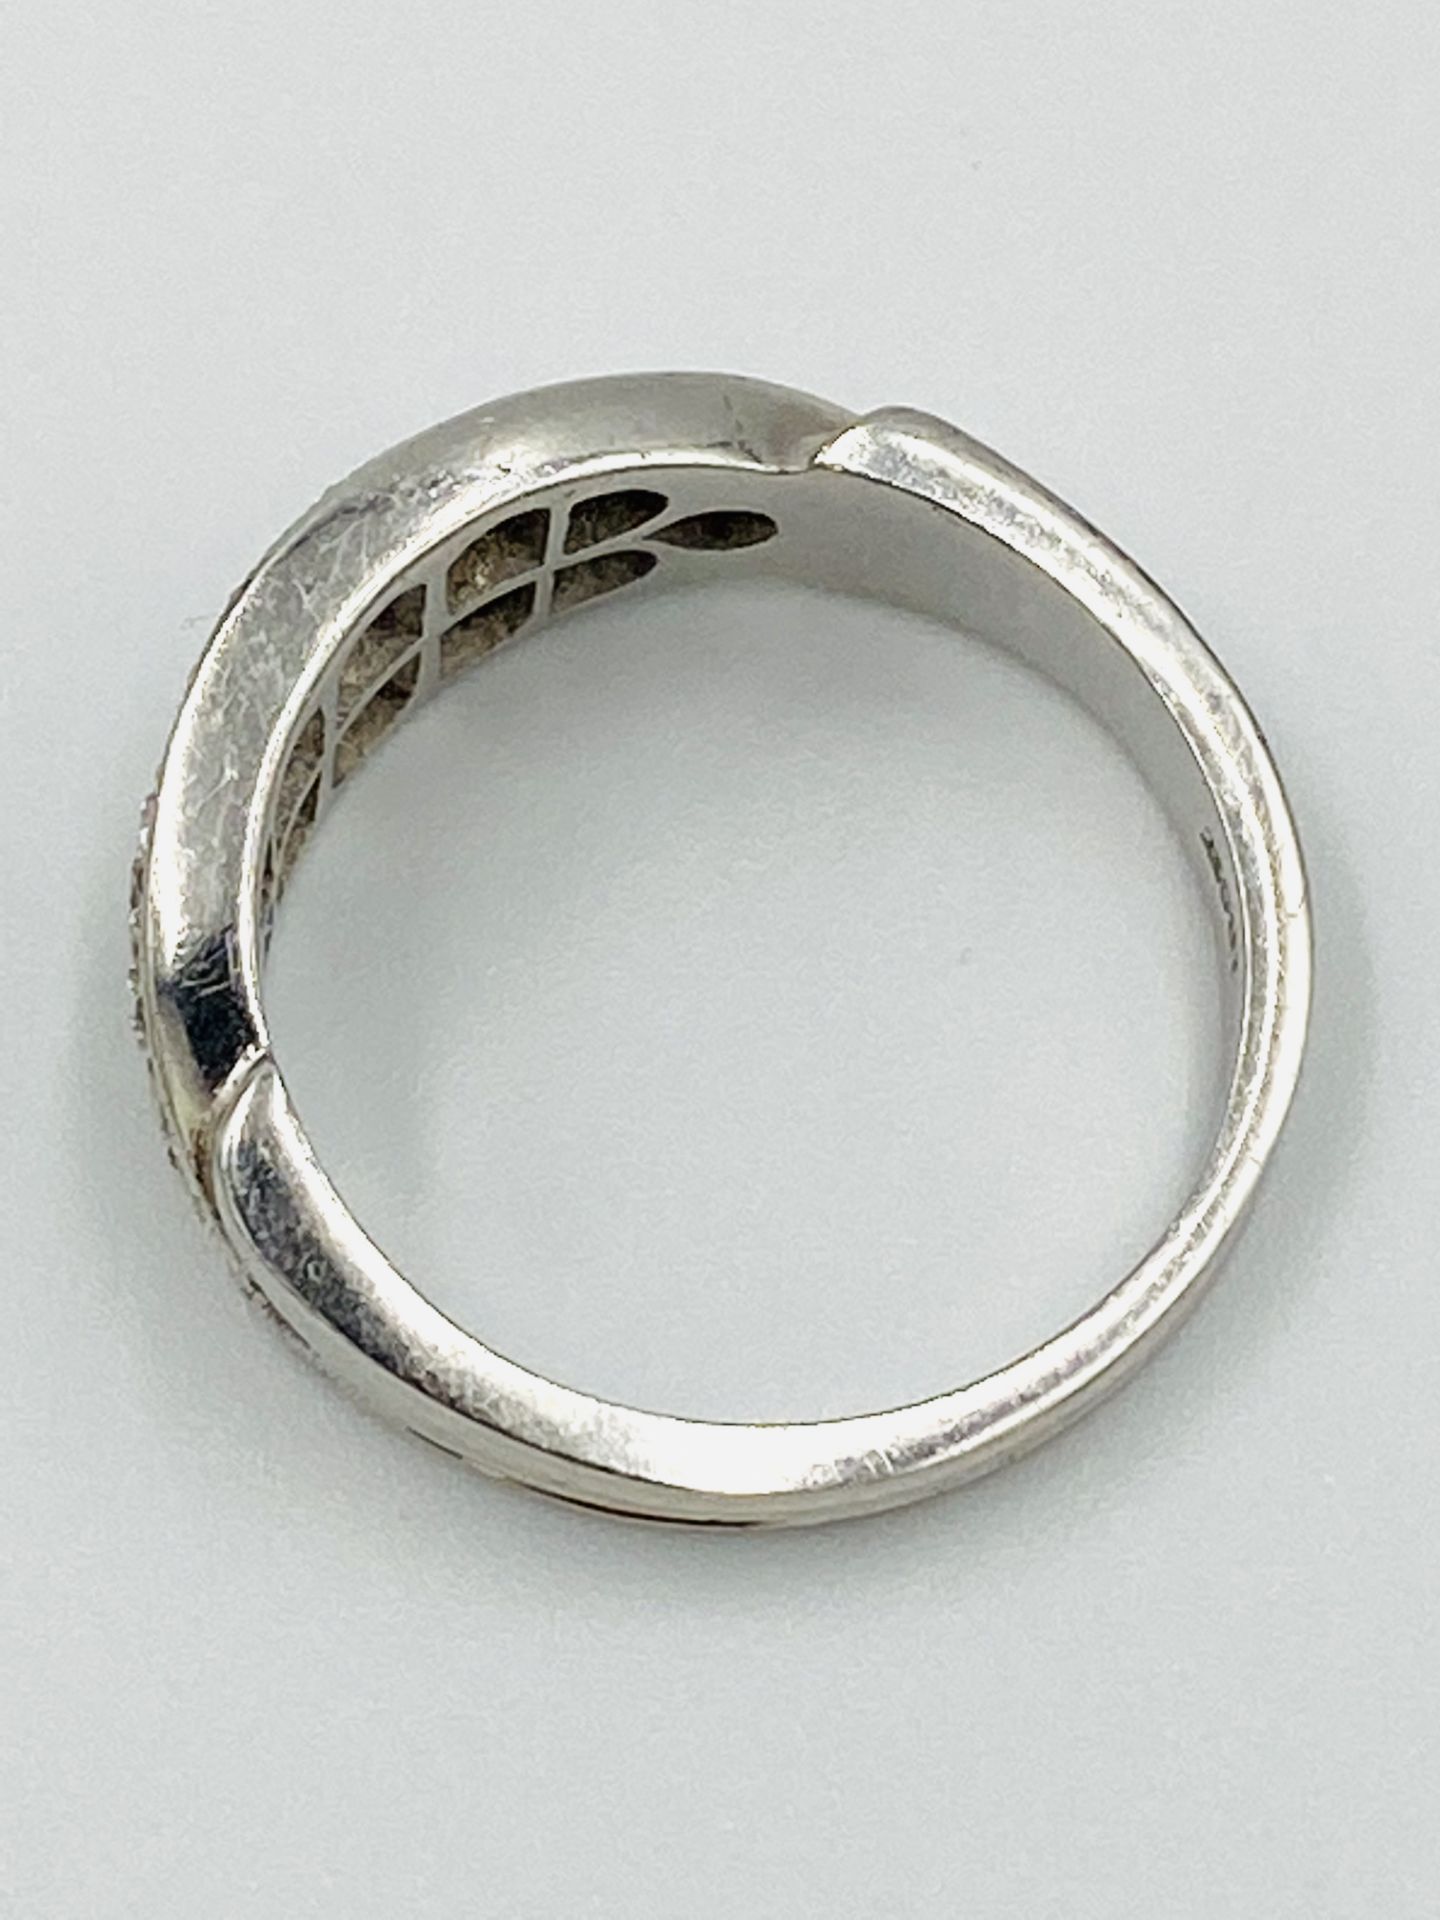 18ct white gold and diamond ring - Image 4 of 5